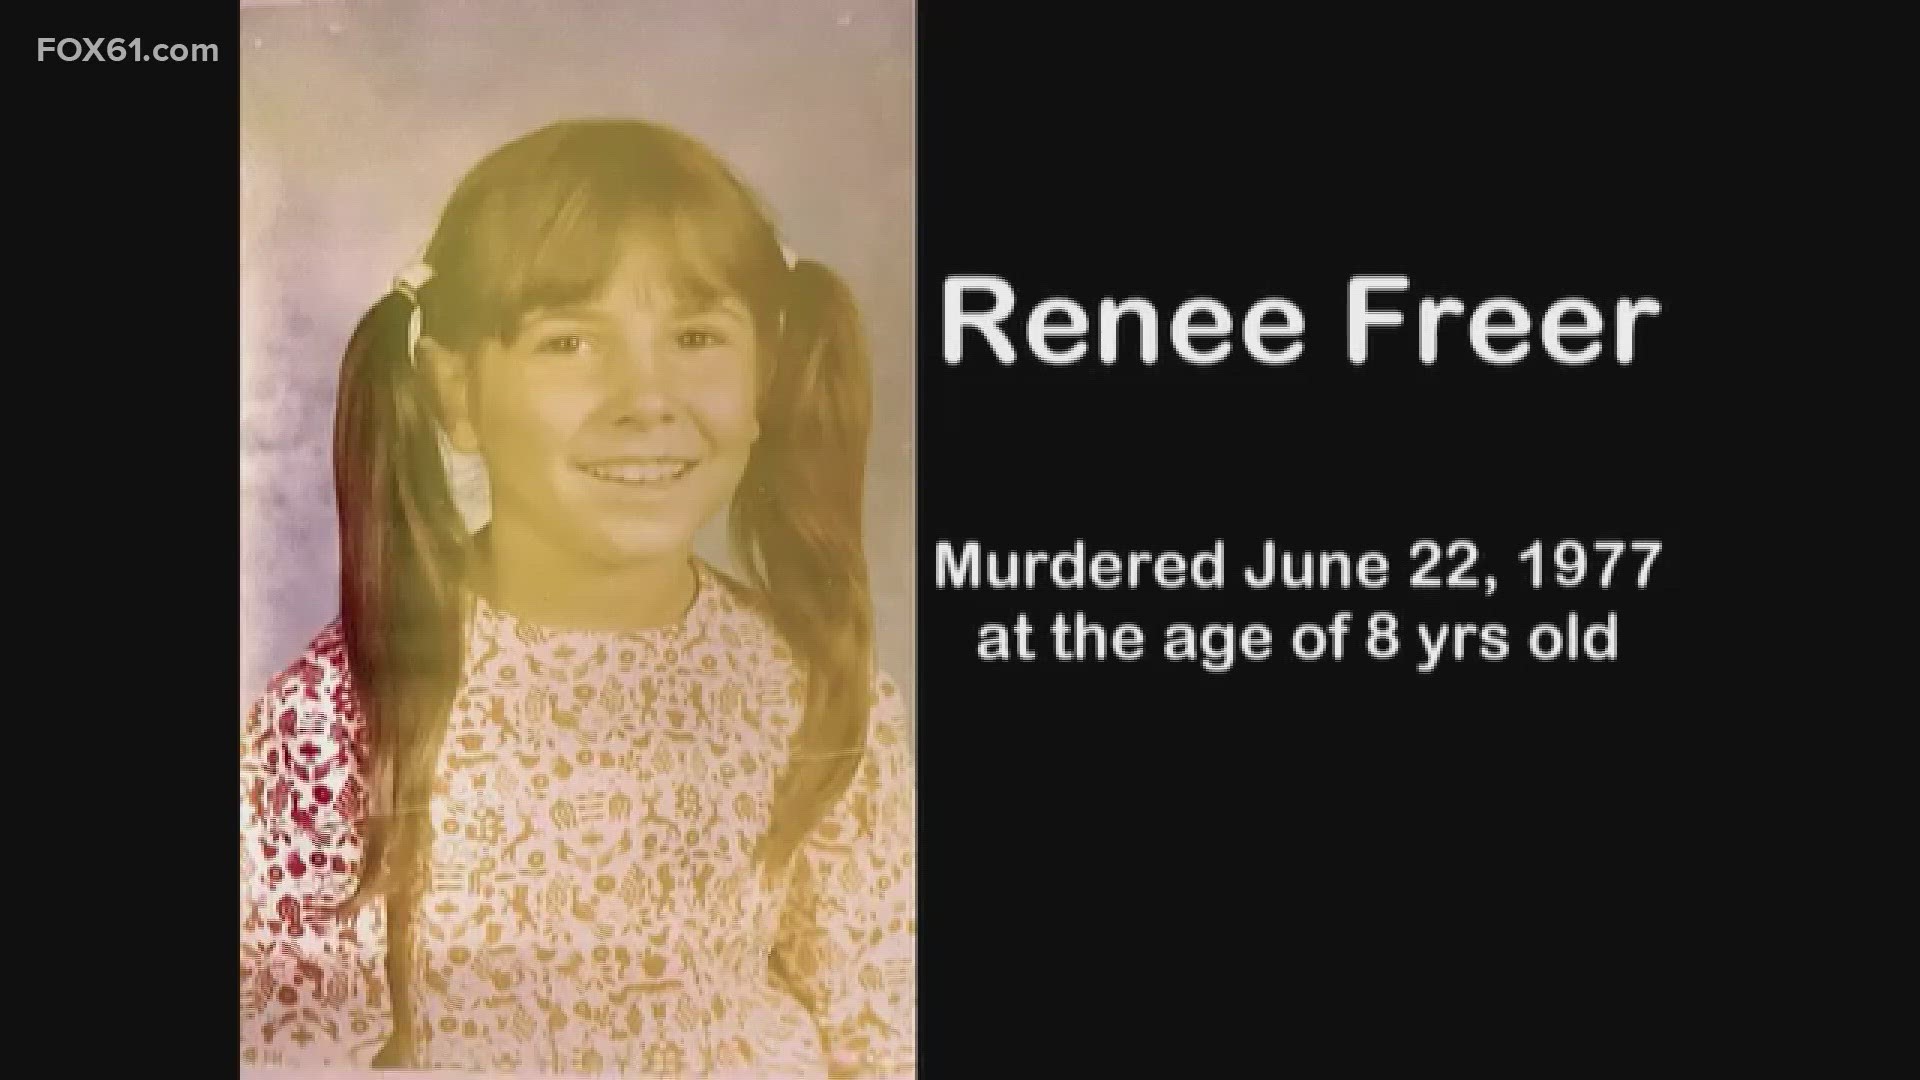 It has been 47 years since the murder of Renee Freer, but Monroe police do not consider the case cold. They are not giving up their pursuit for justice.